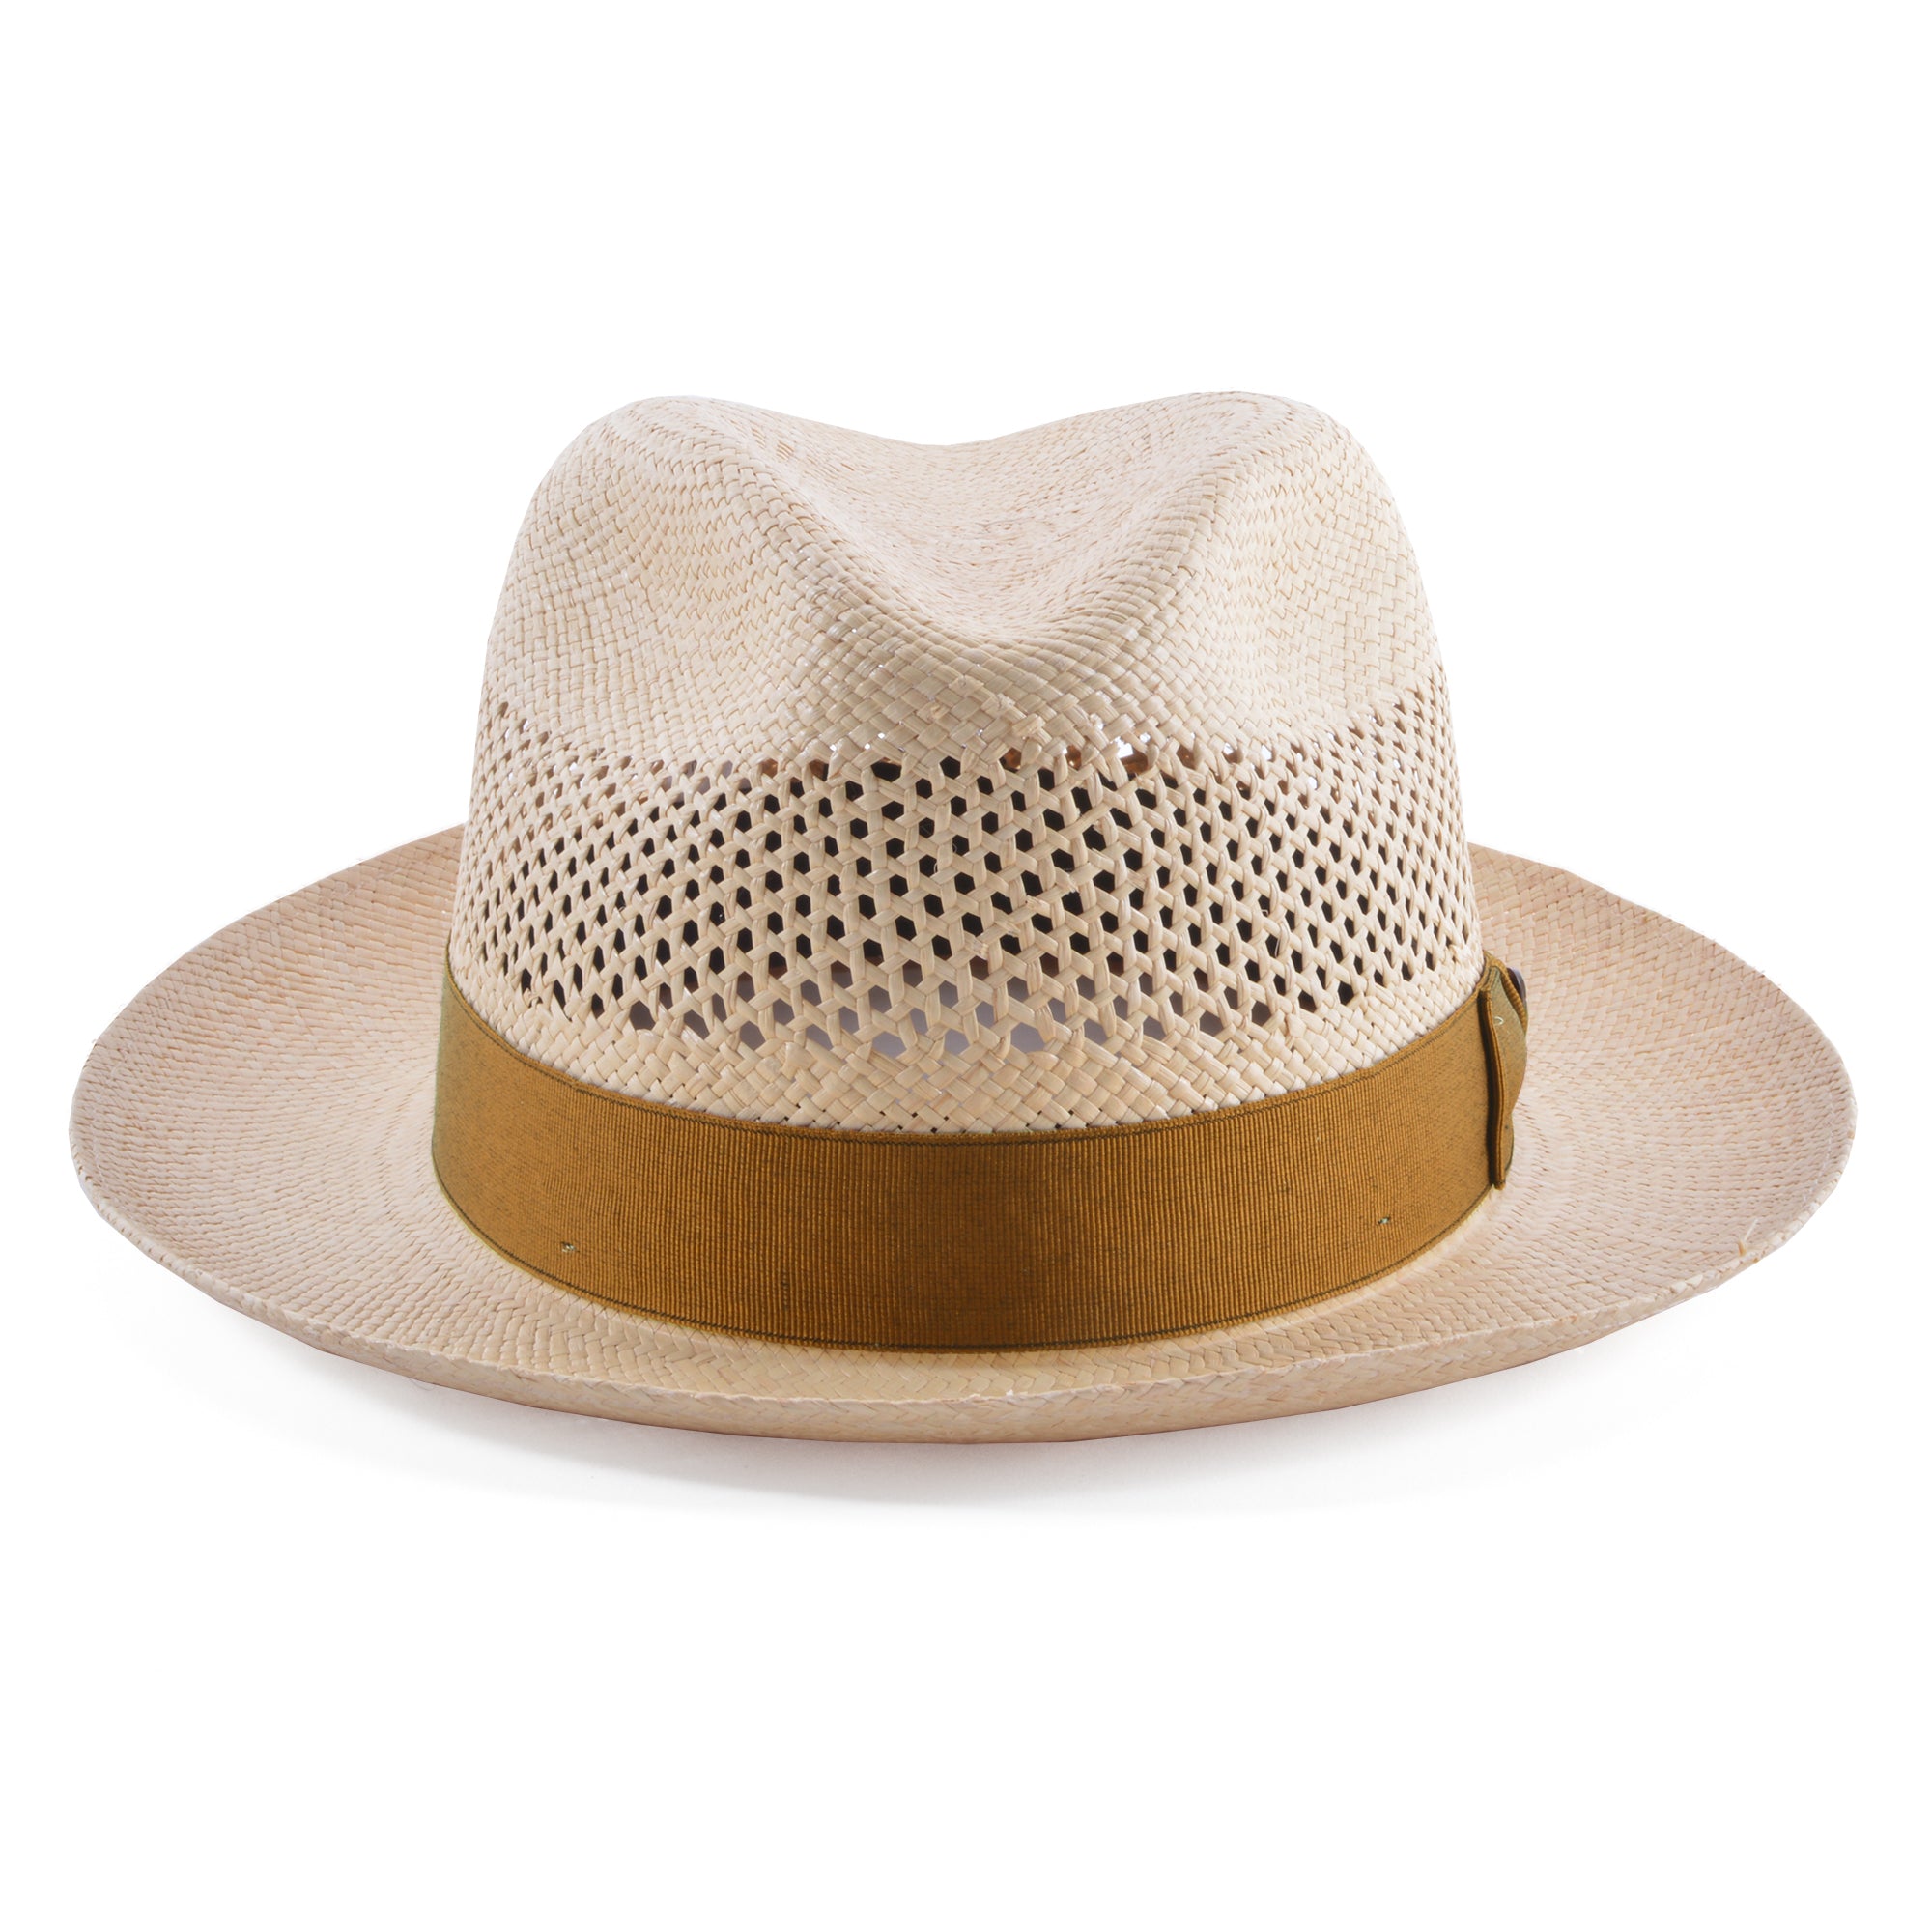 Stetson The Moor Panama Straw Fedora Hat with Hat Box - 0